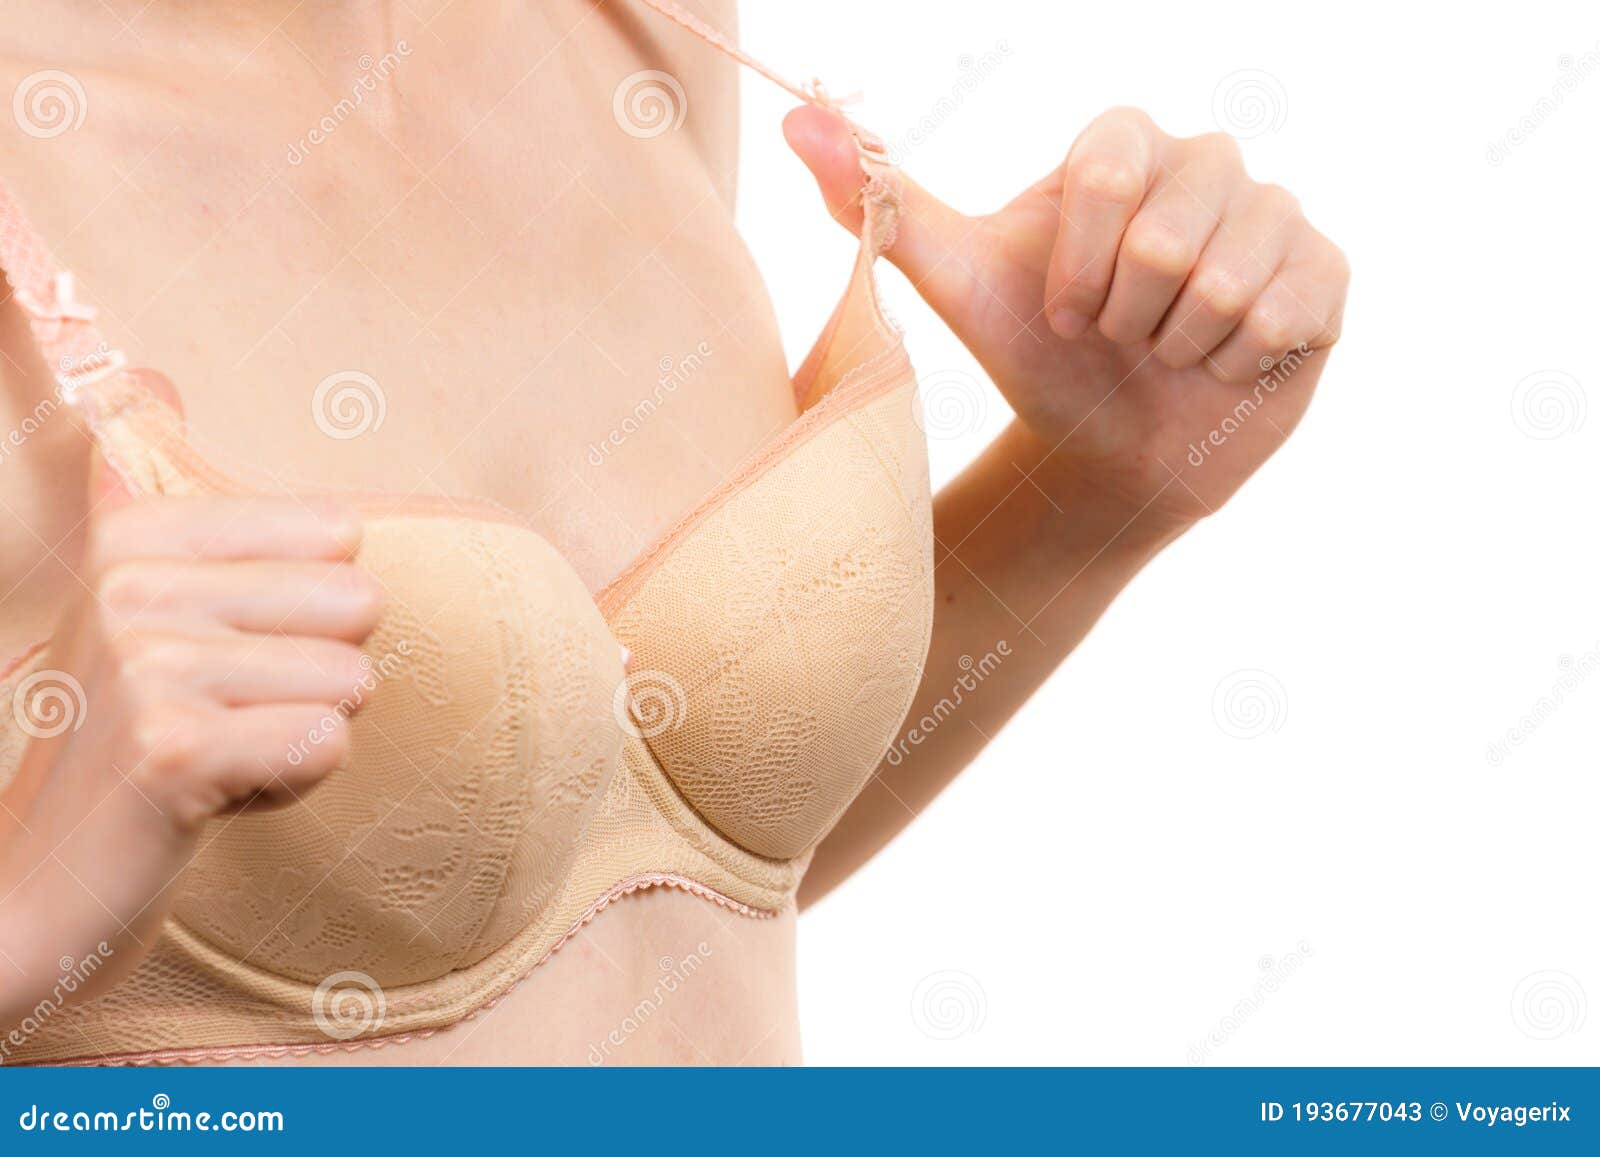 https://thumbs.dreamstime.com/z/slim-young-woman-small-boobs-wearing-too-big-bra-female-breast-wrong-size-lingerie-bosom-brafitting-underwear-concept-woman-193677043.jpg